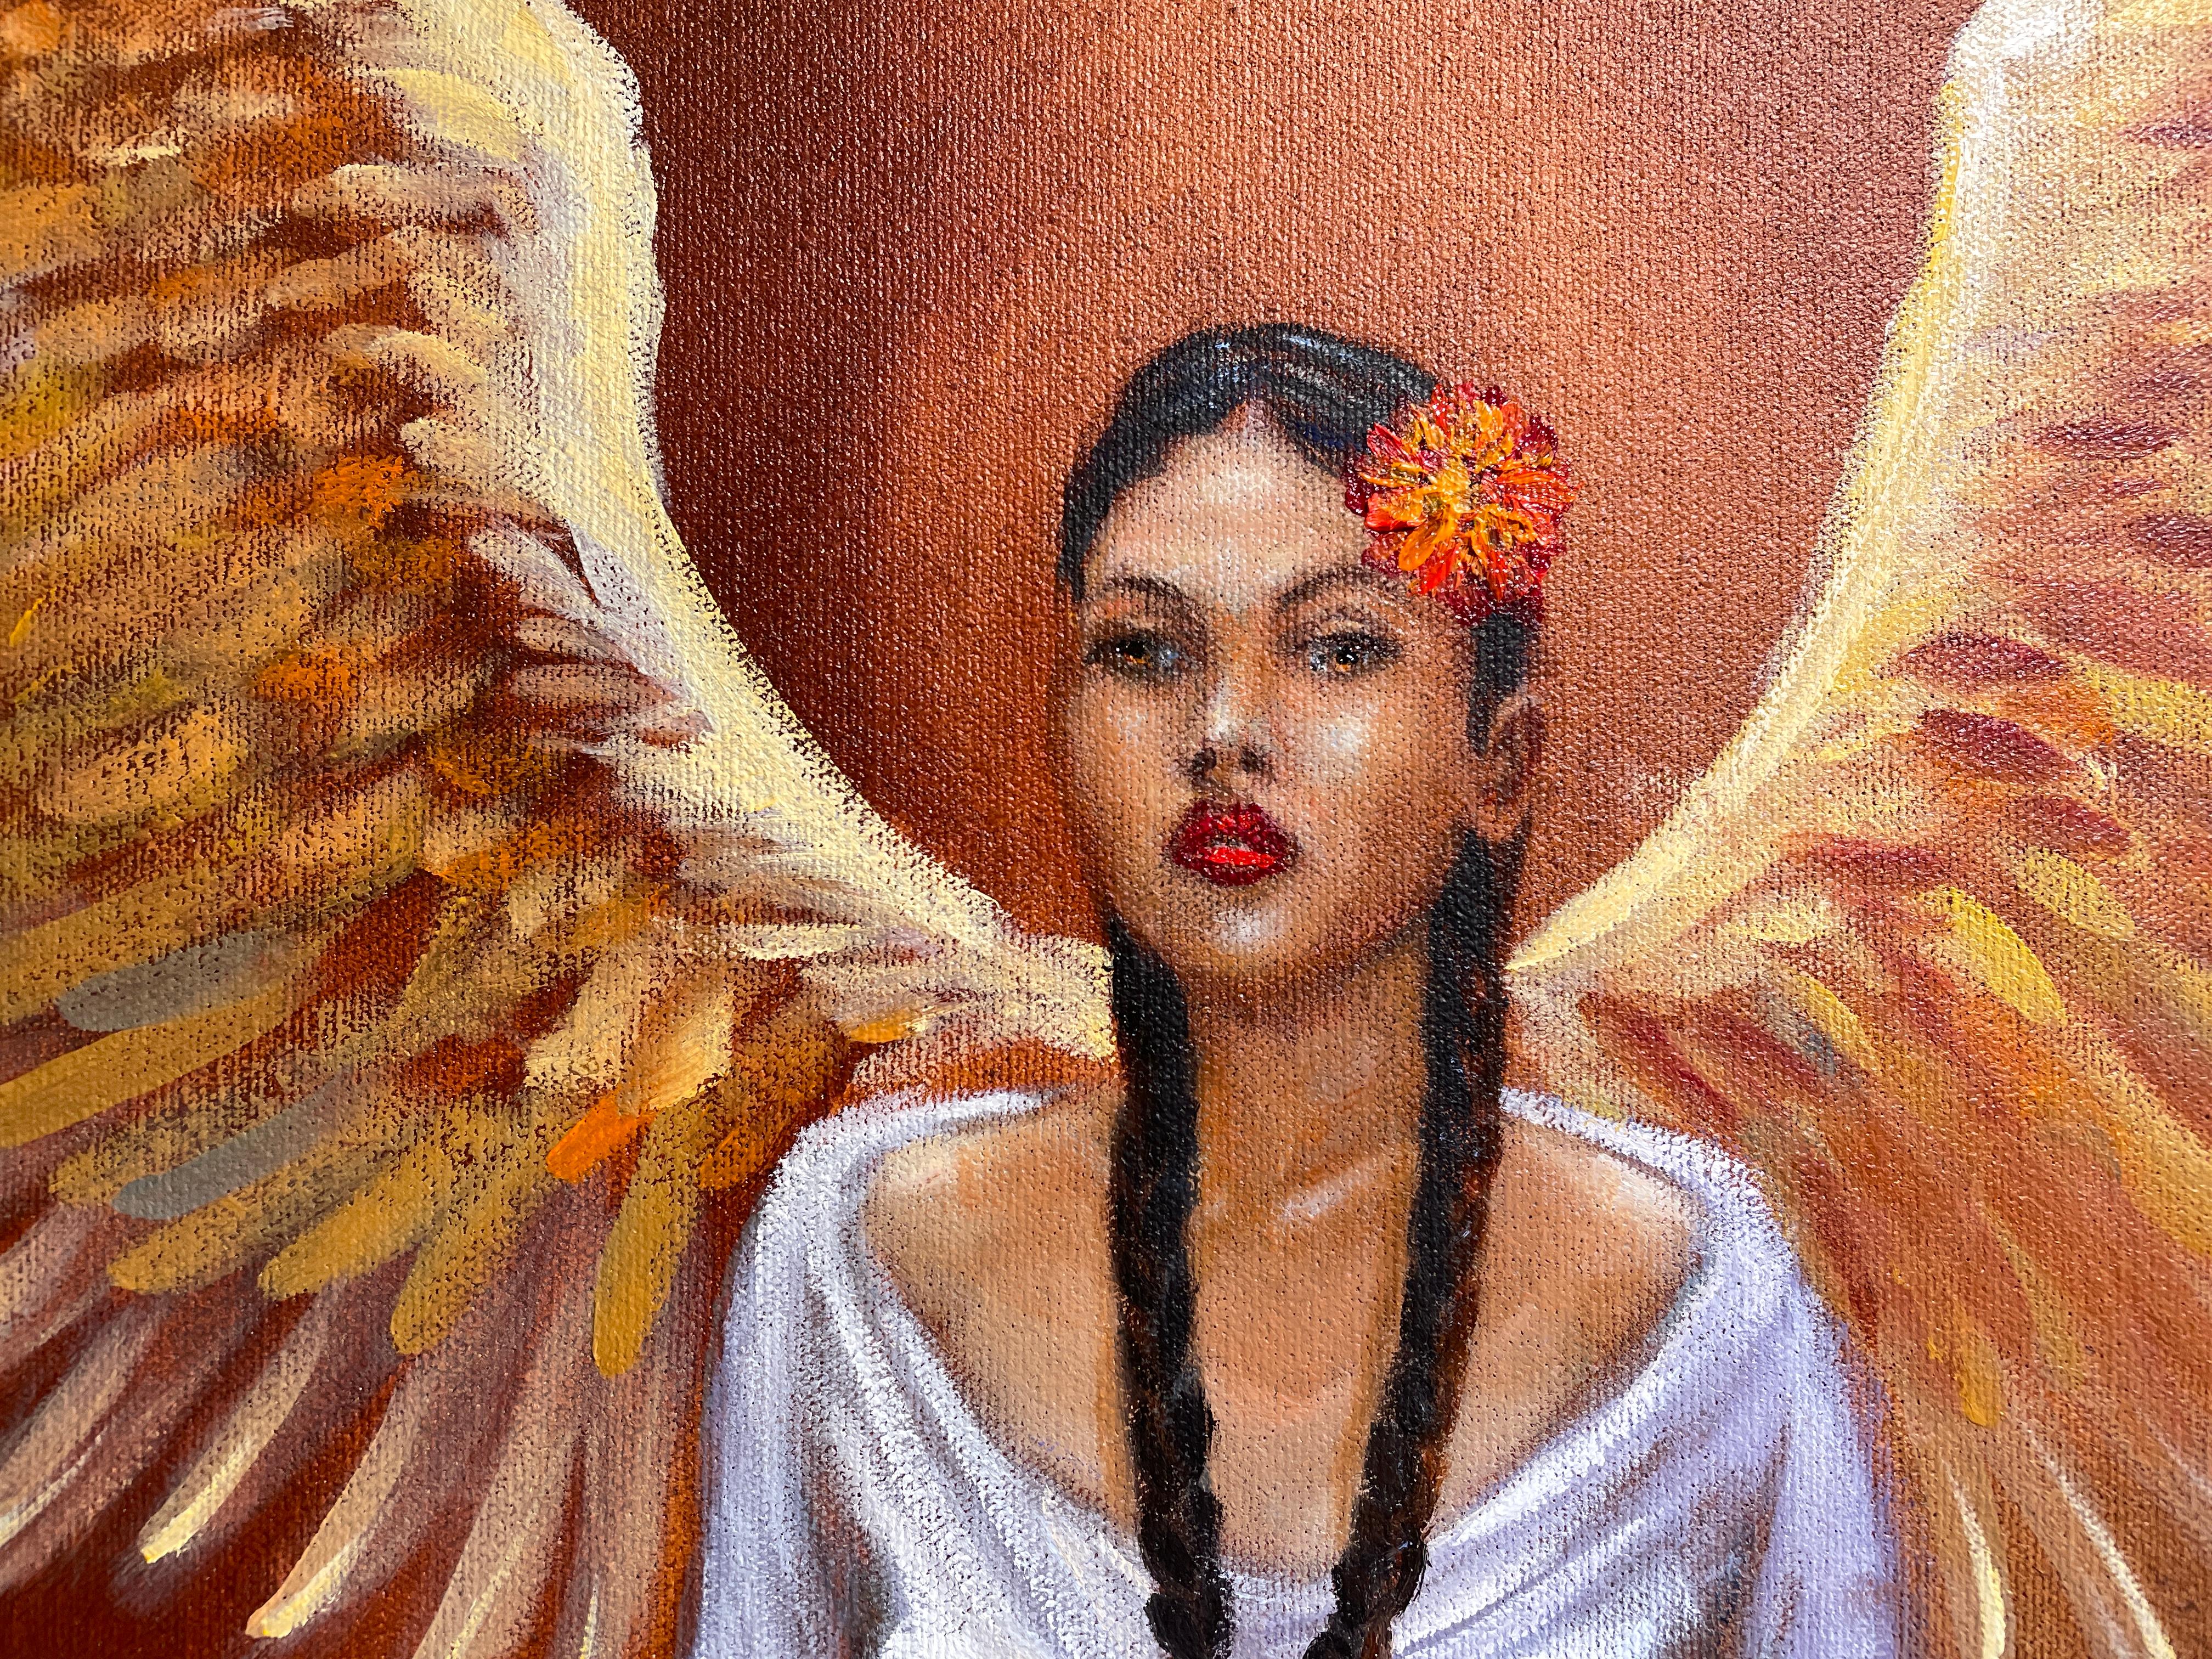 'The Descent' - Fallen Angel Series - Modern Young Woman Figurative Oil Canvas  - Contemporary Painting by Avelino Sanher